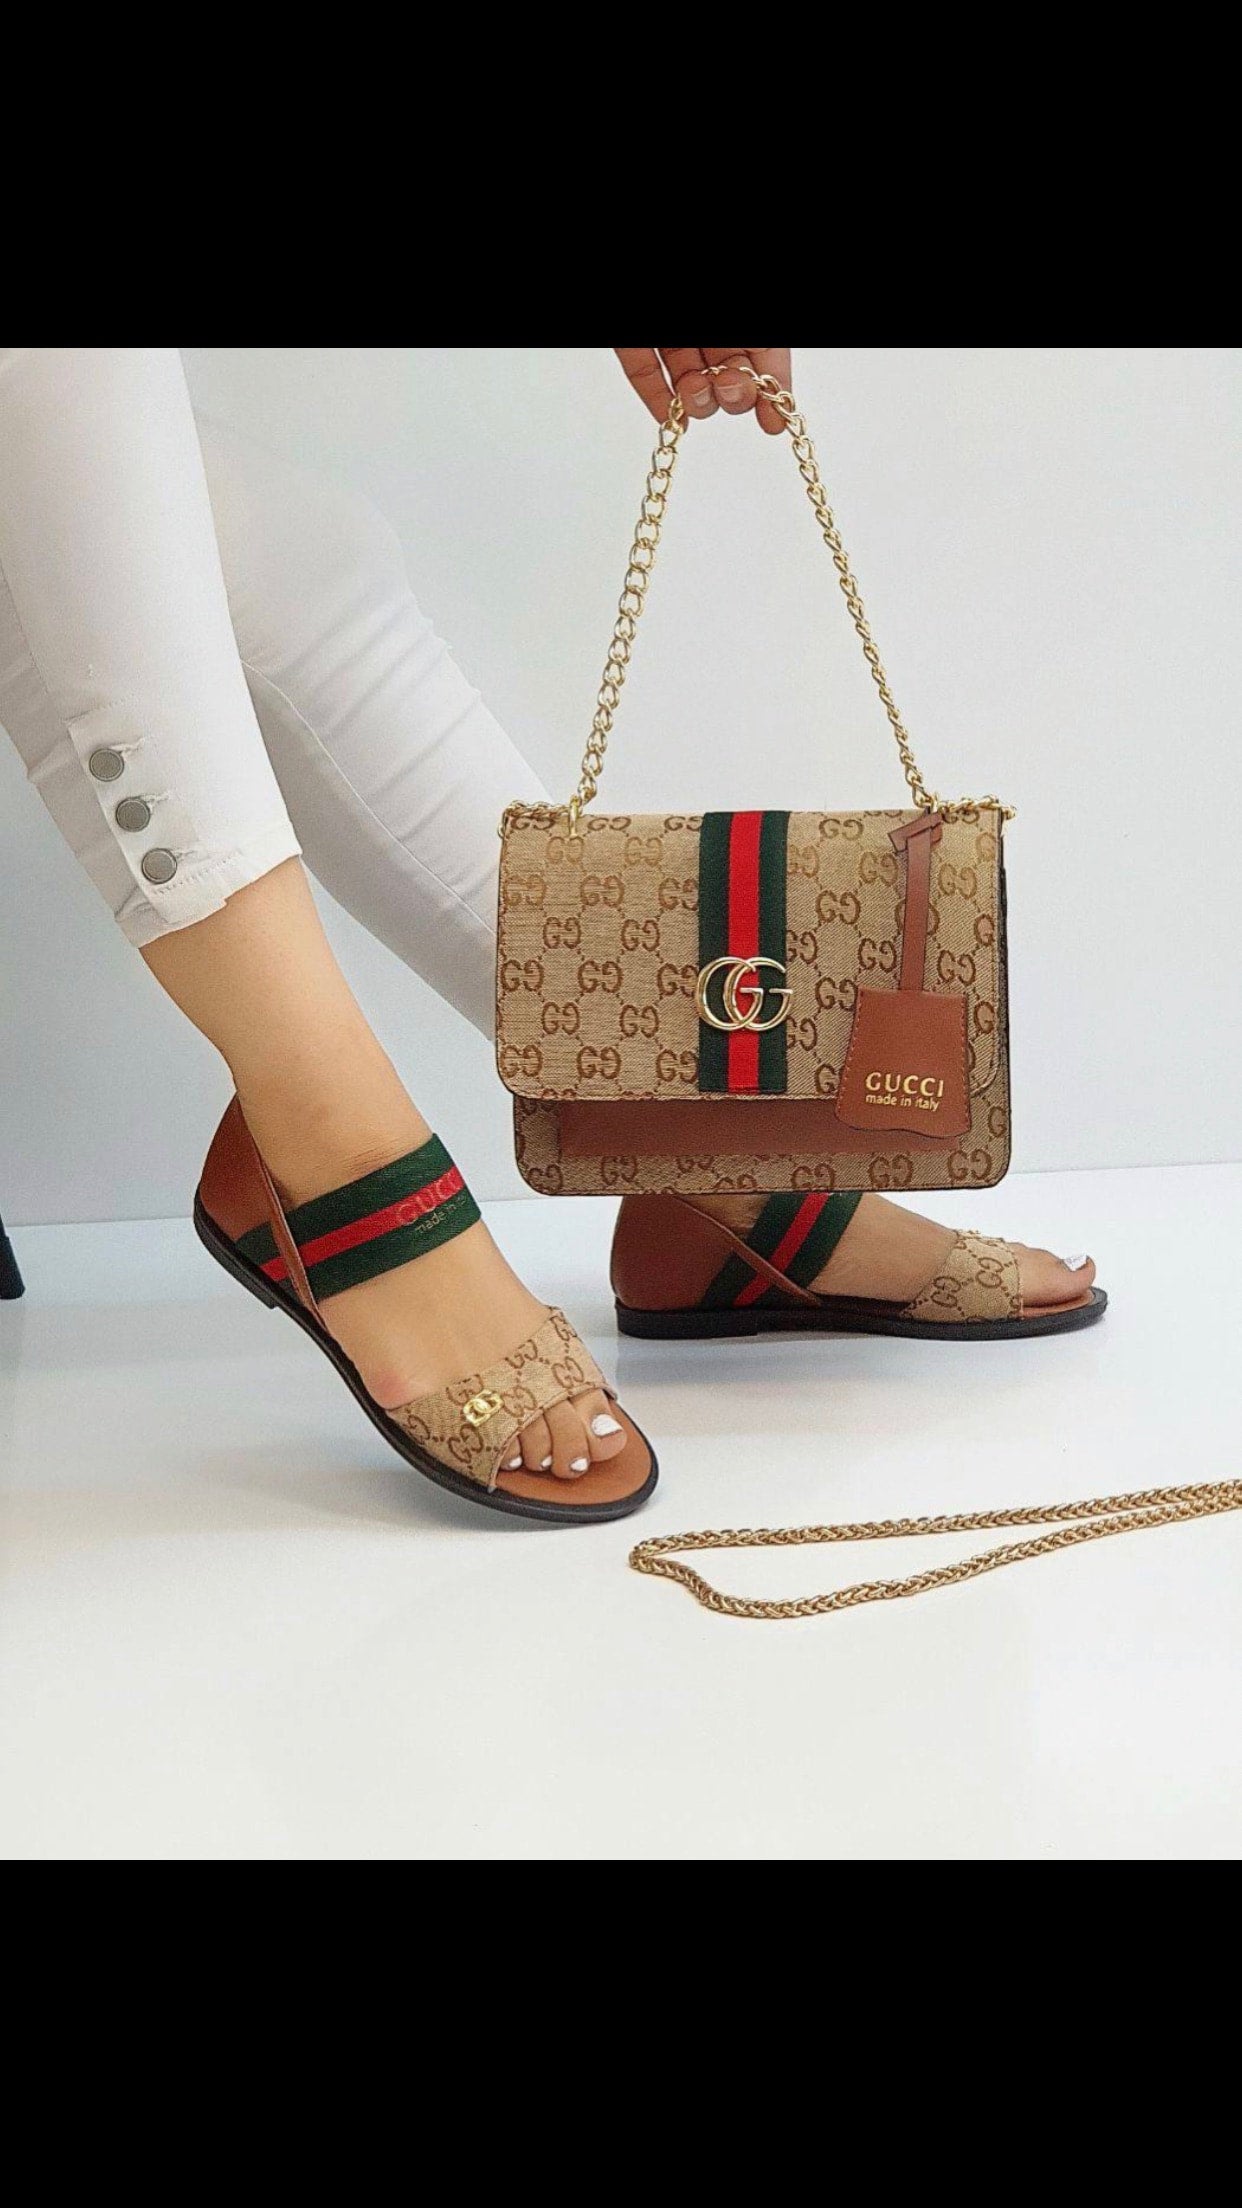 Ikirezi Boutique - Gucci sandals, Price: 30,000Frw / 40USD Come and shop  with us, we are located in MIC (Muhima Investment Company) town. For  business inquiries call us or WhatsApp on +250(0)788356987 . .